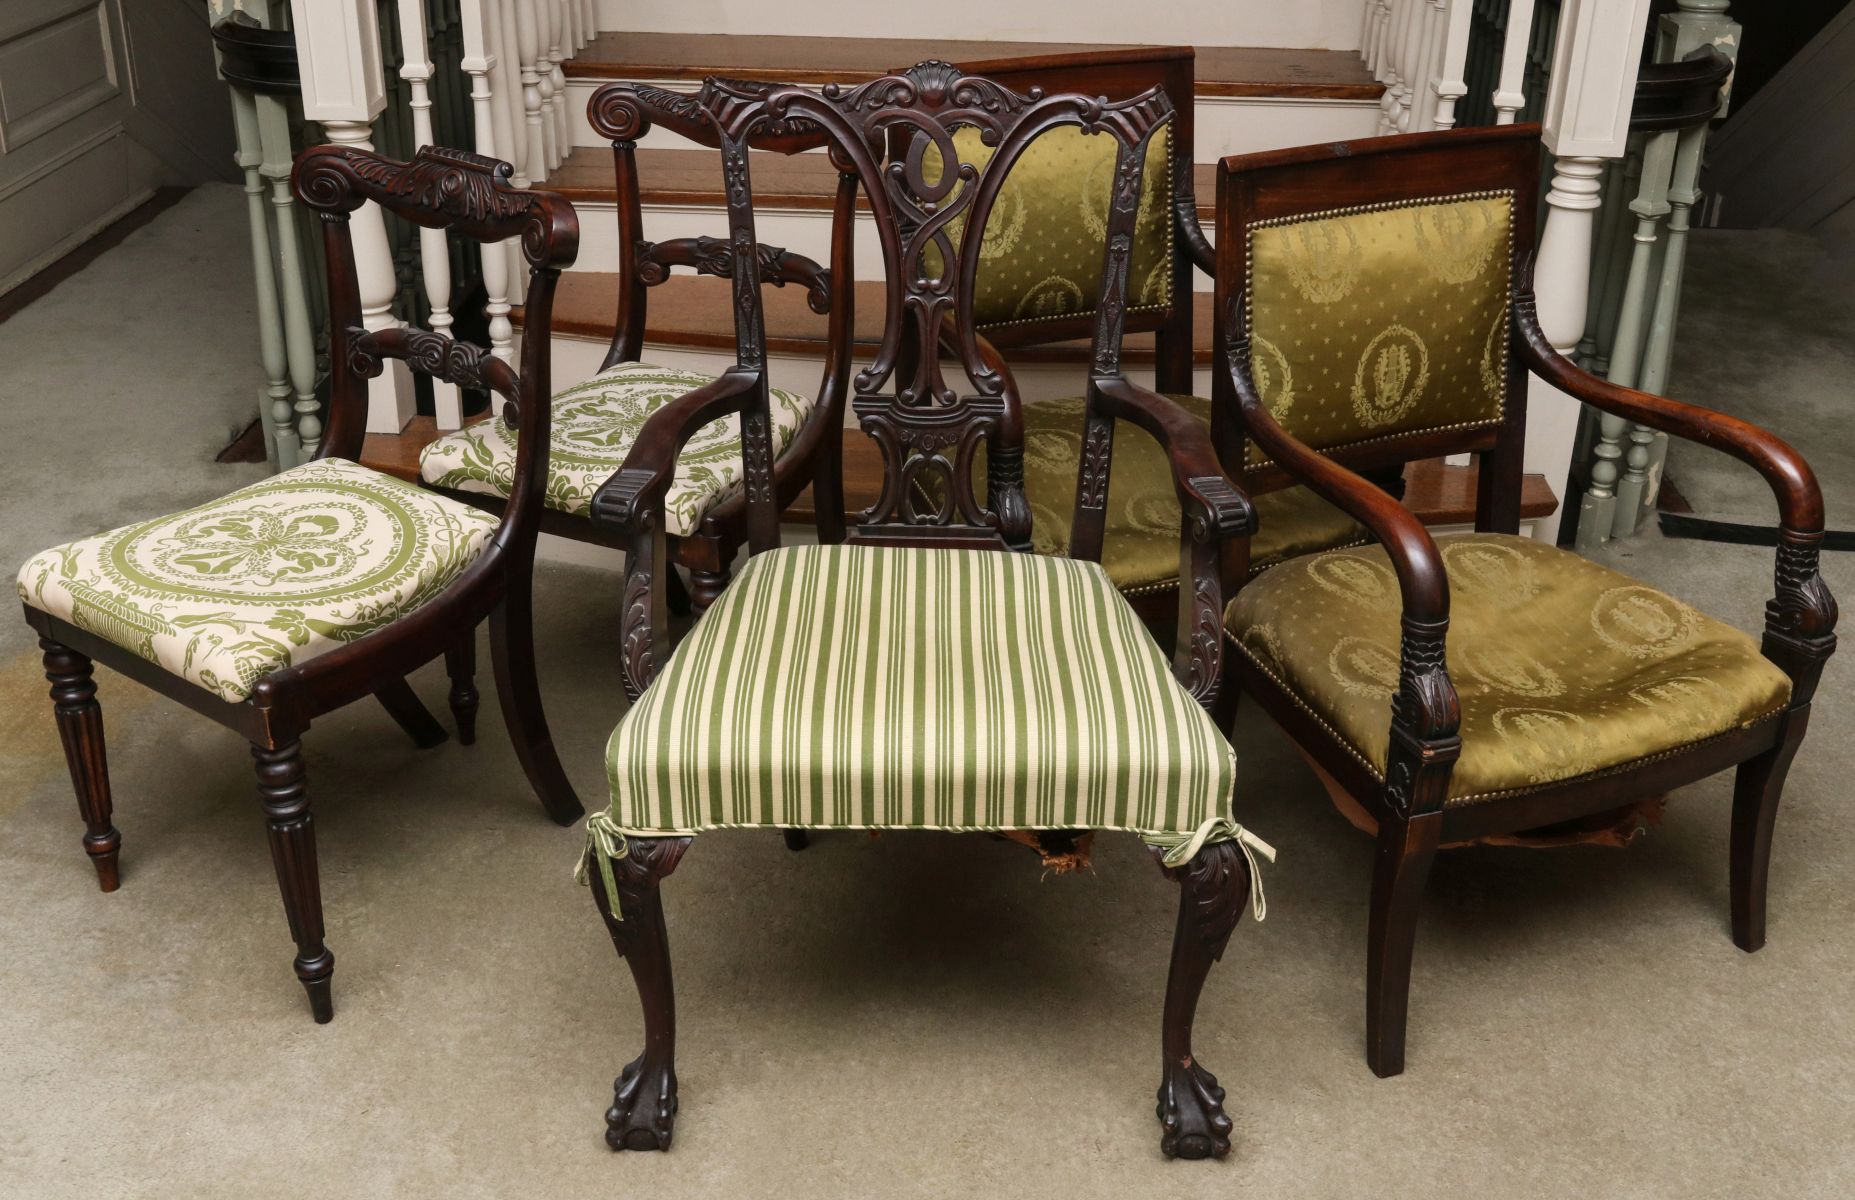 A COLLECTION OF 19TH/EARLY 20TH C. CARVED CHAIRS